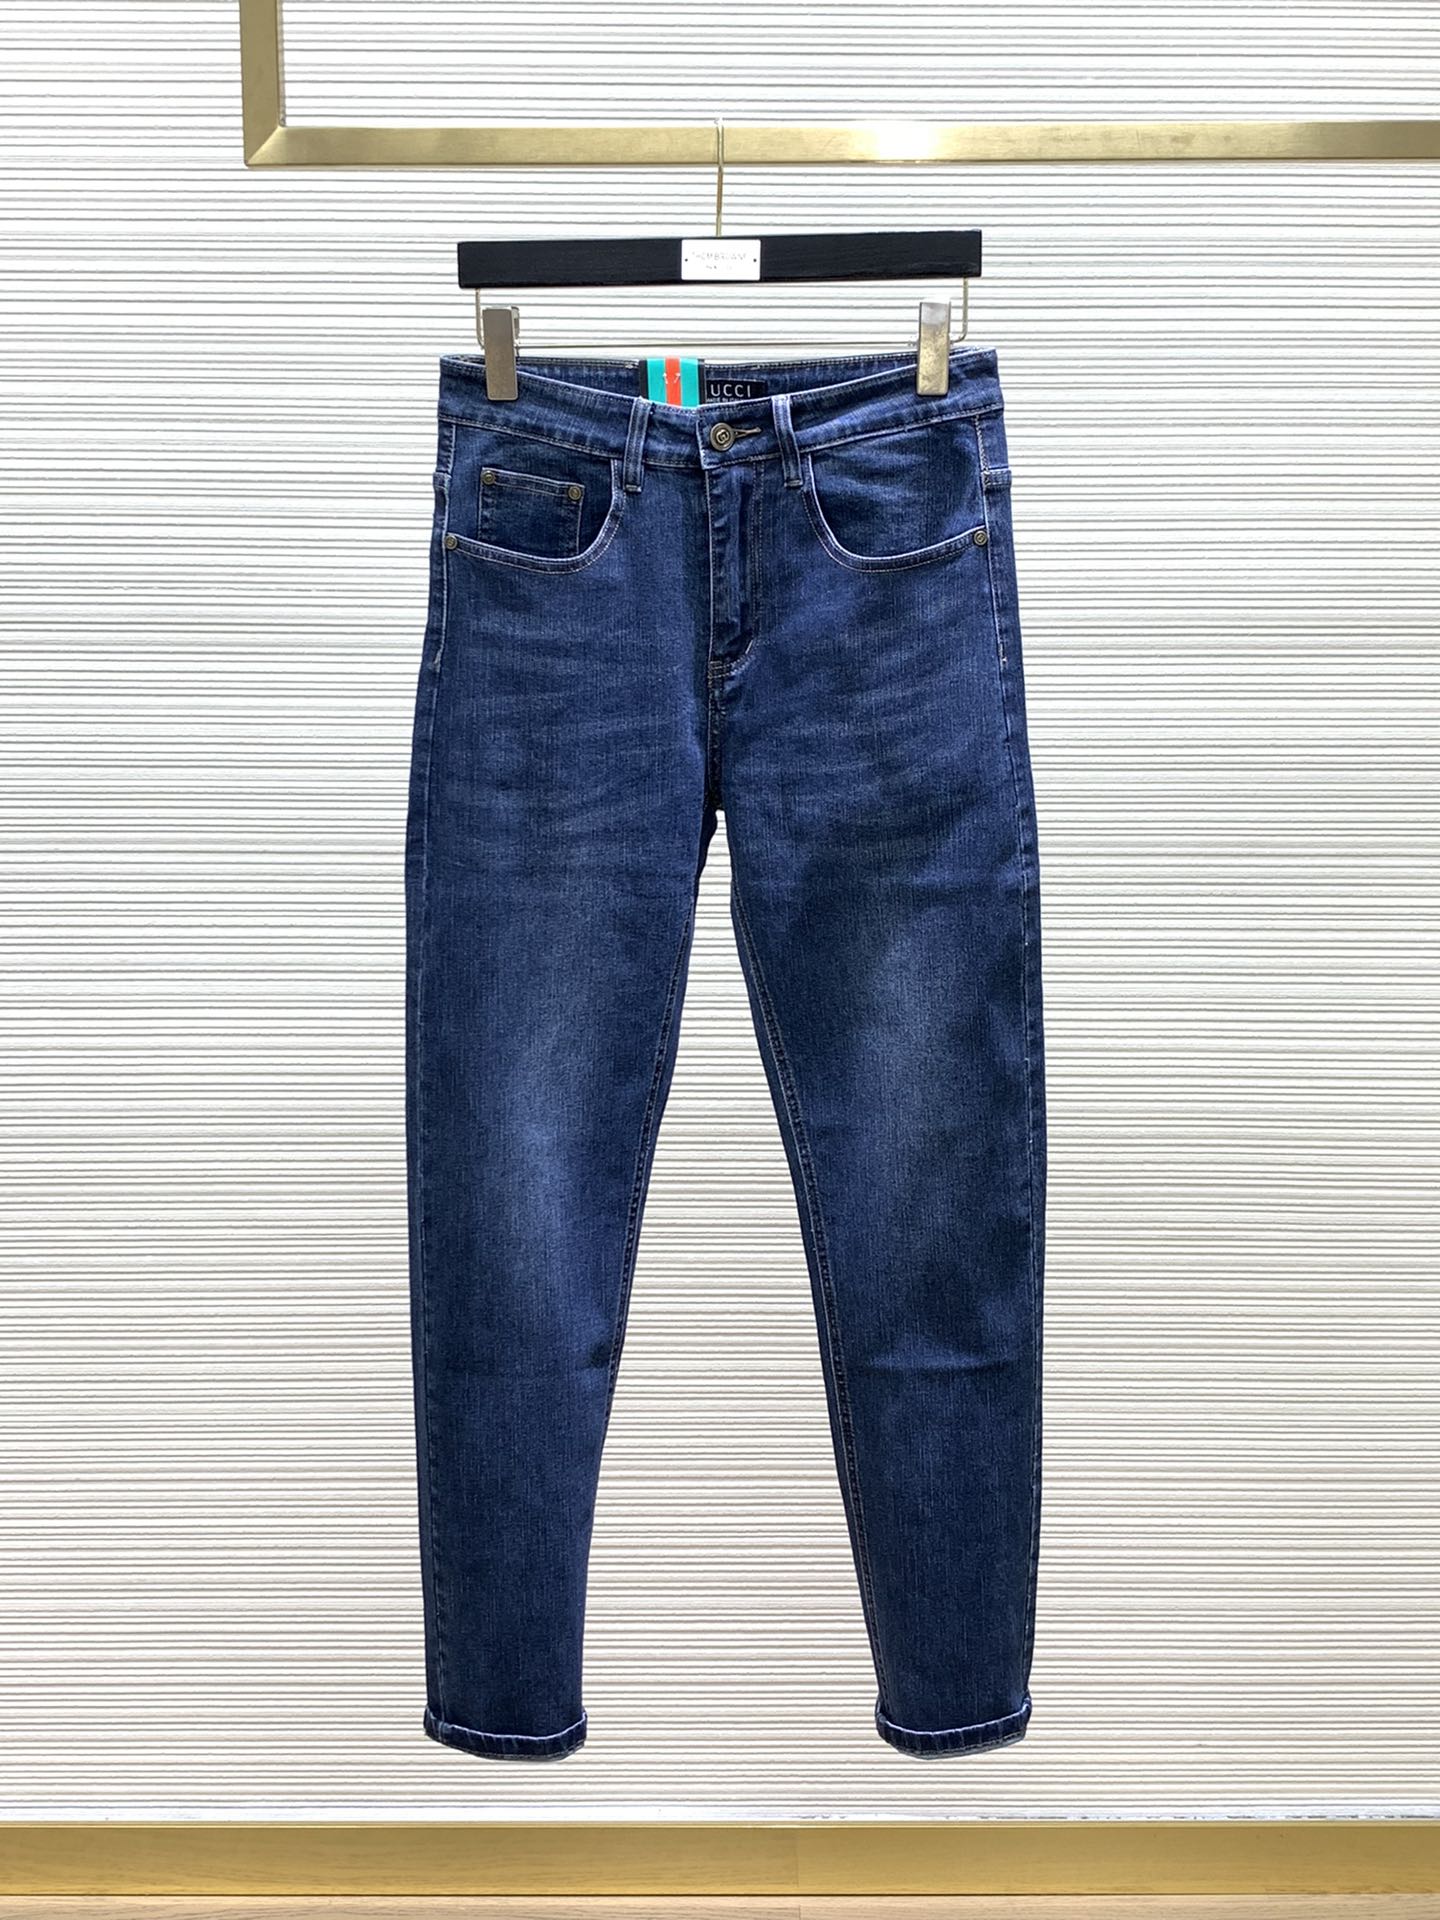 Gucci Flawless
 Clothing Jeans Printing Spring Collection Casual